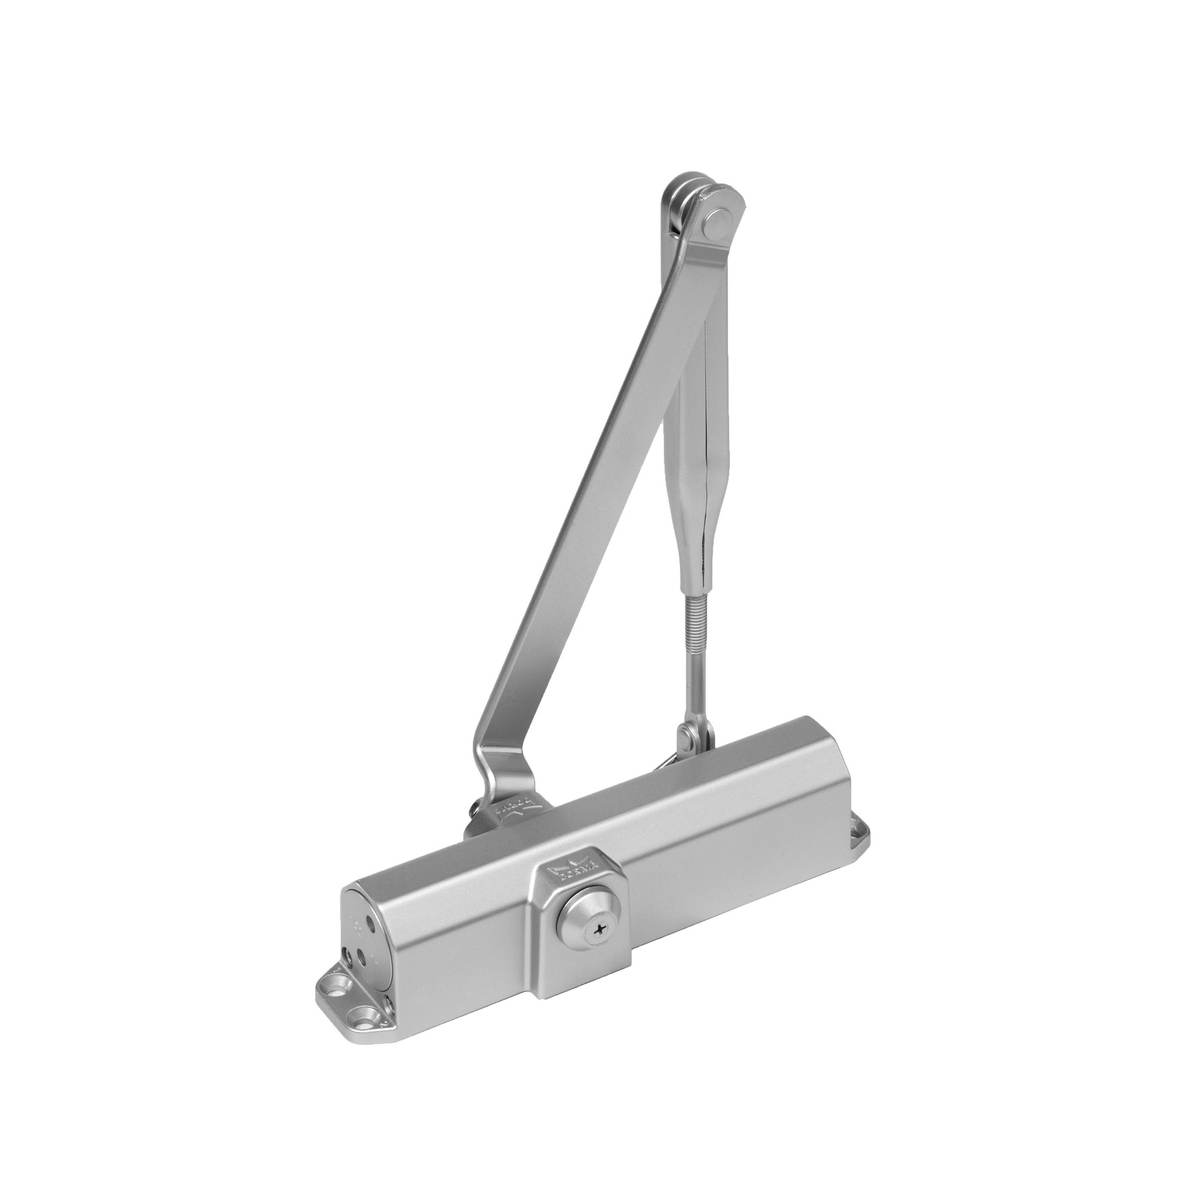 This is an image of the DORMA TS Compakt door closer.